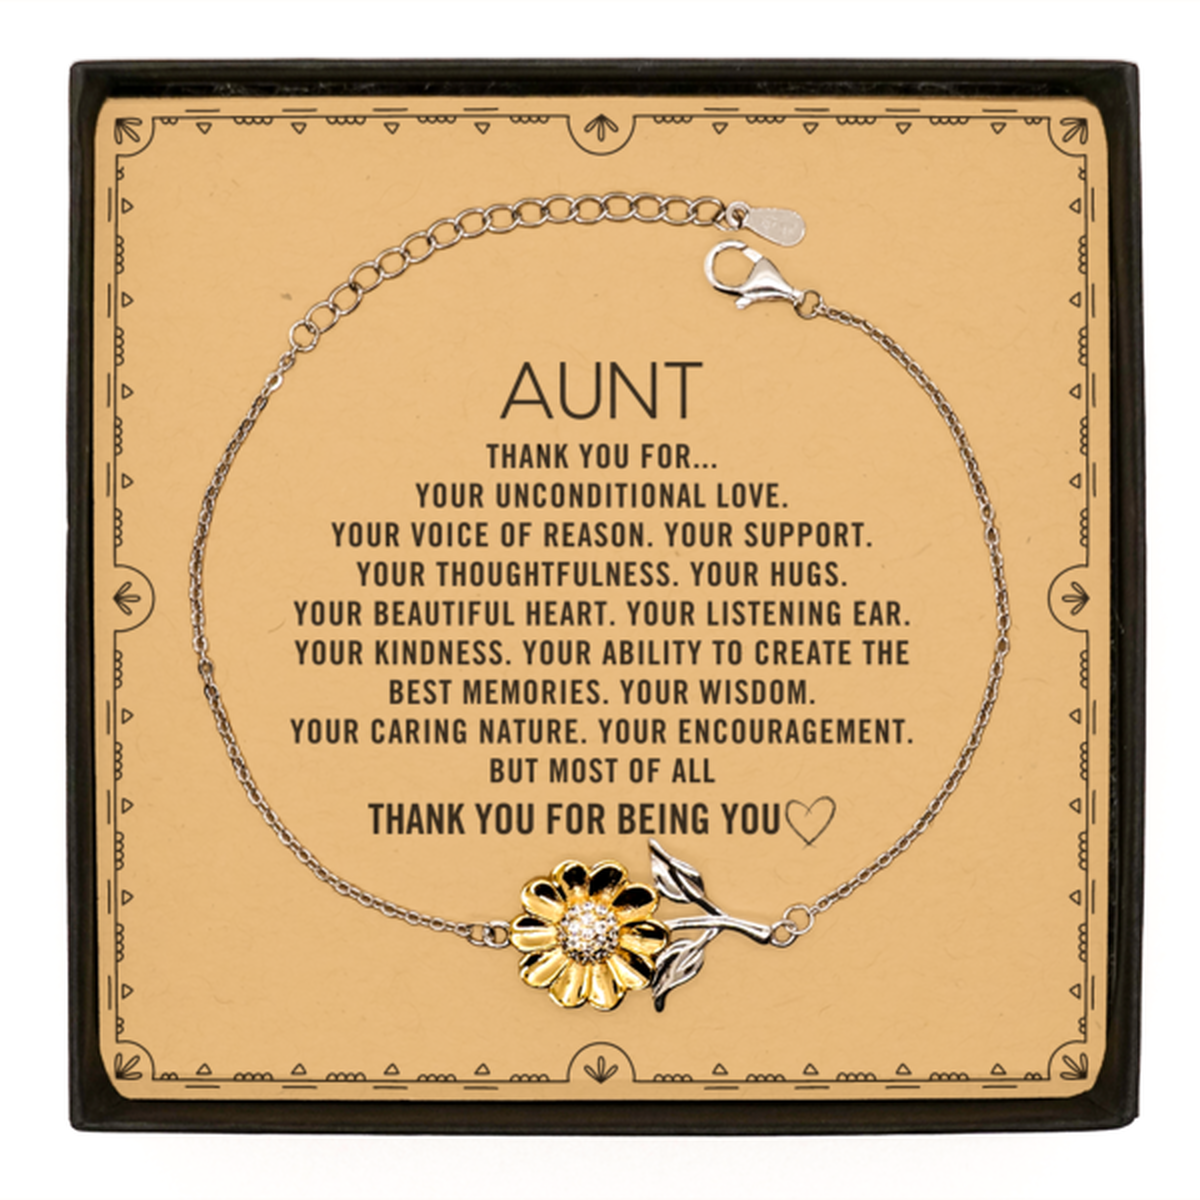 Aunt Sunflower Bracelet Custom, Message Card Gifts For Aunt Christmas Graduation Birthday Gifts for Men Women Aunt Thank you for Your unconditional love